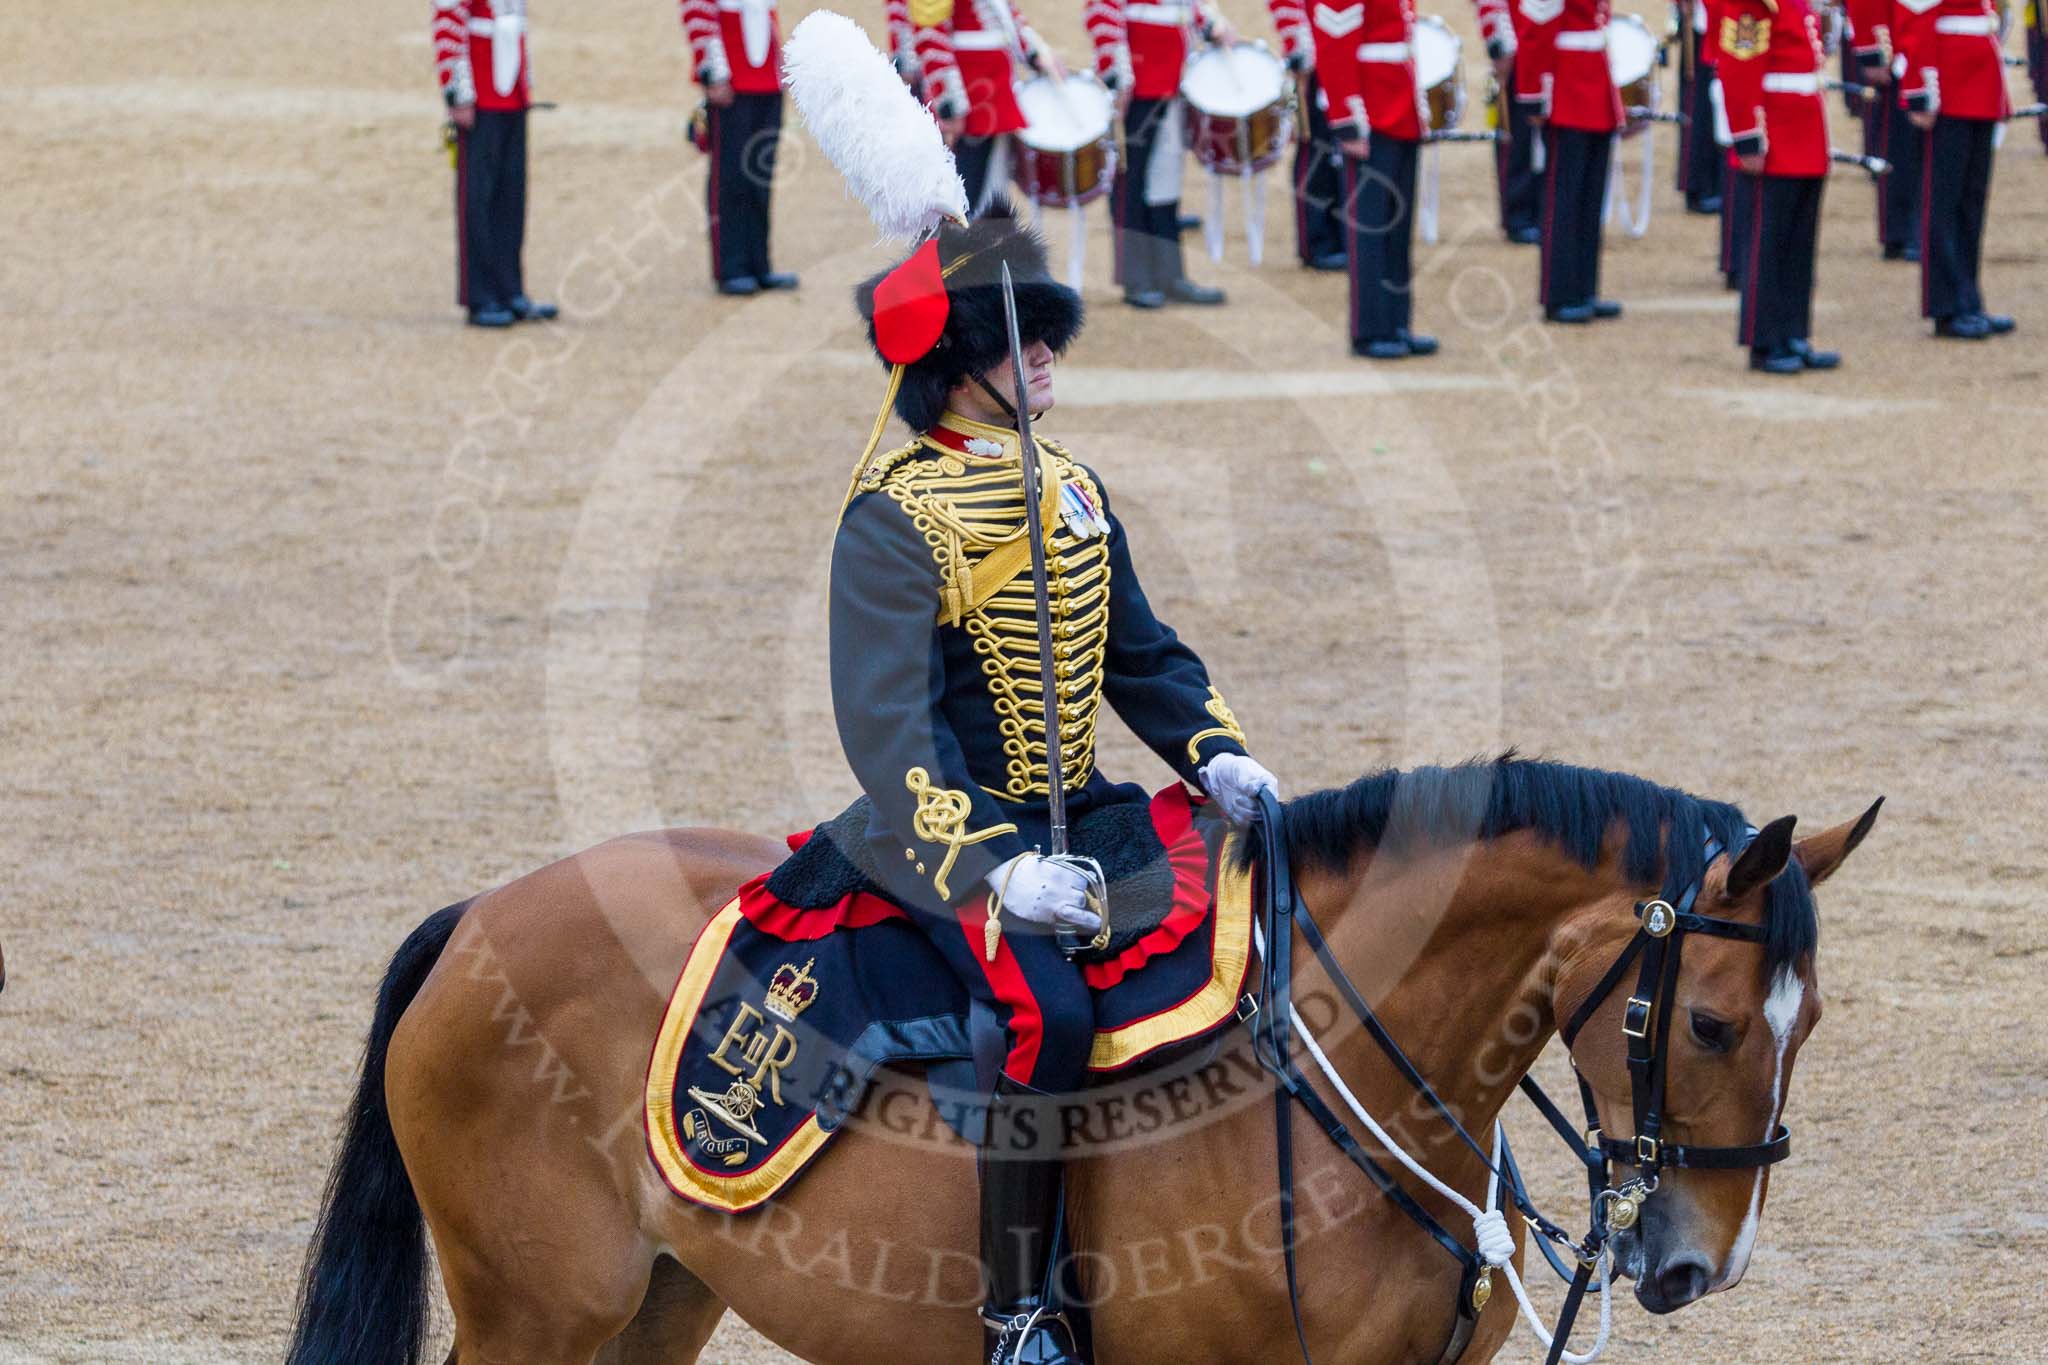 Trooping the Colour 2015. Image #530, 13 June 2015 11:53 Horse Guards Parade, London, UK